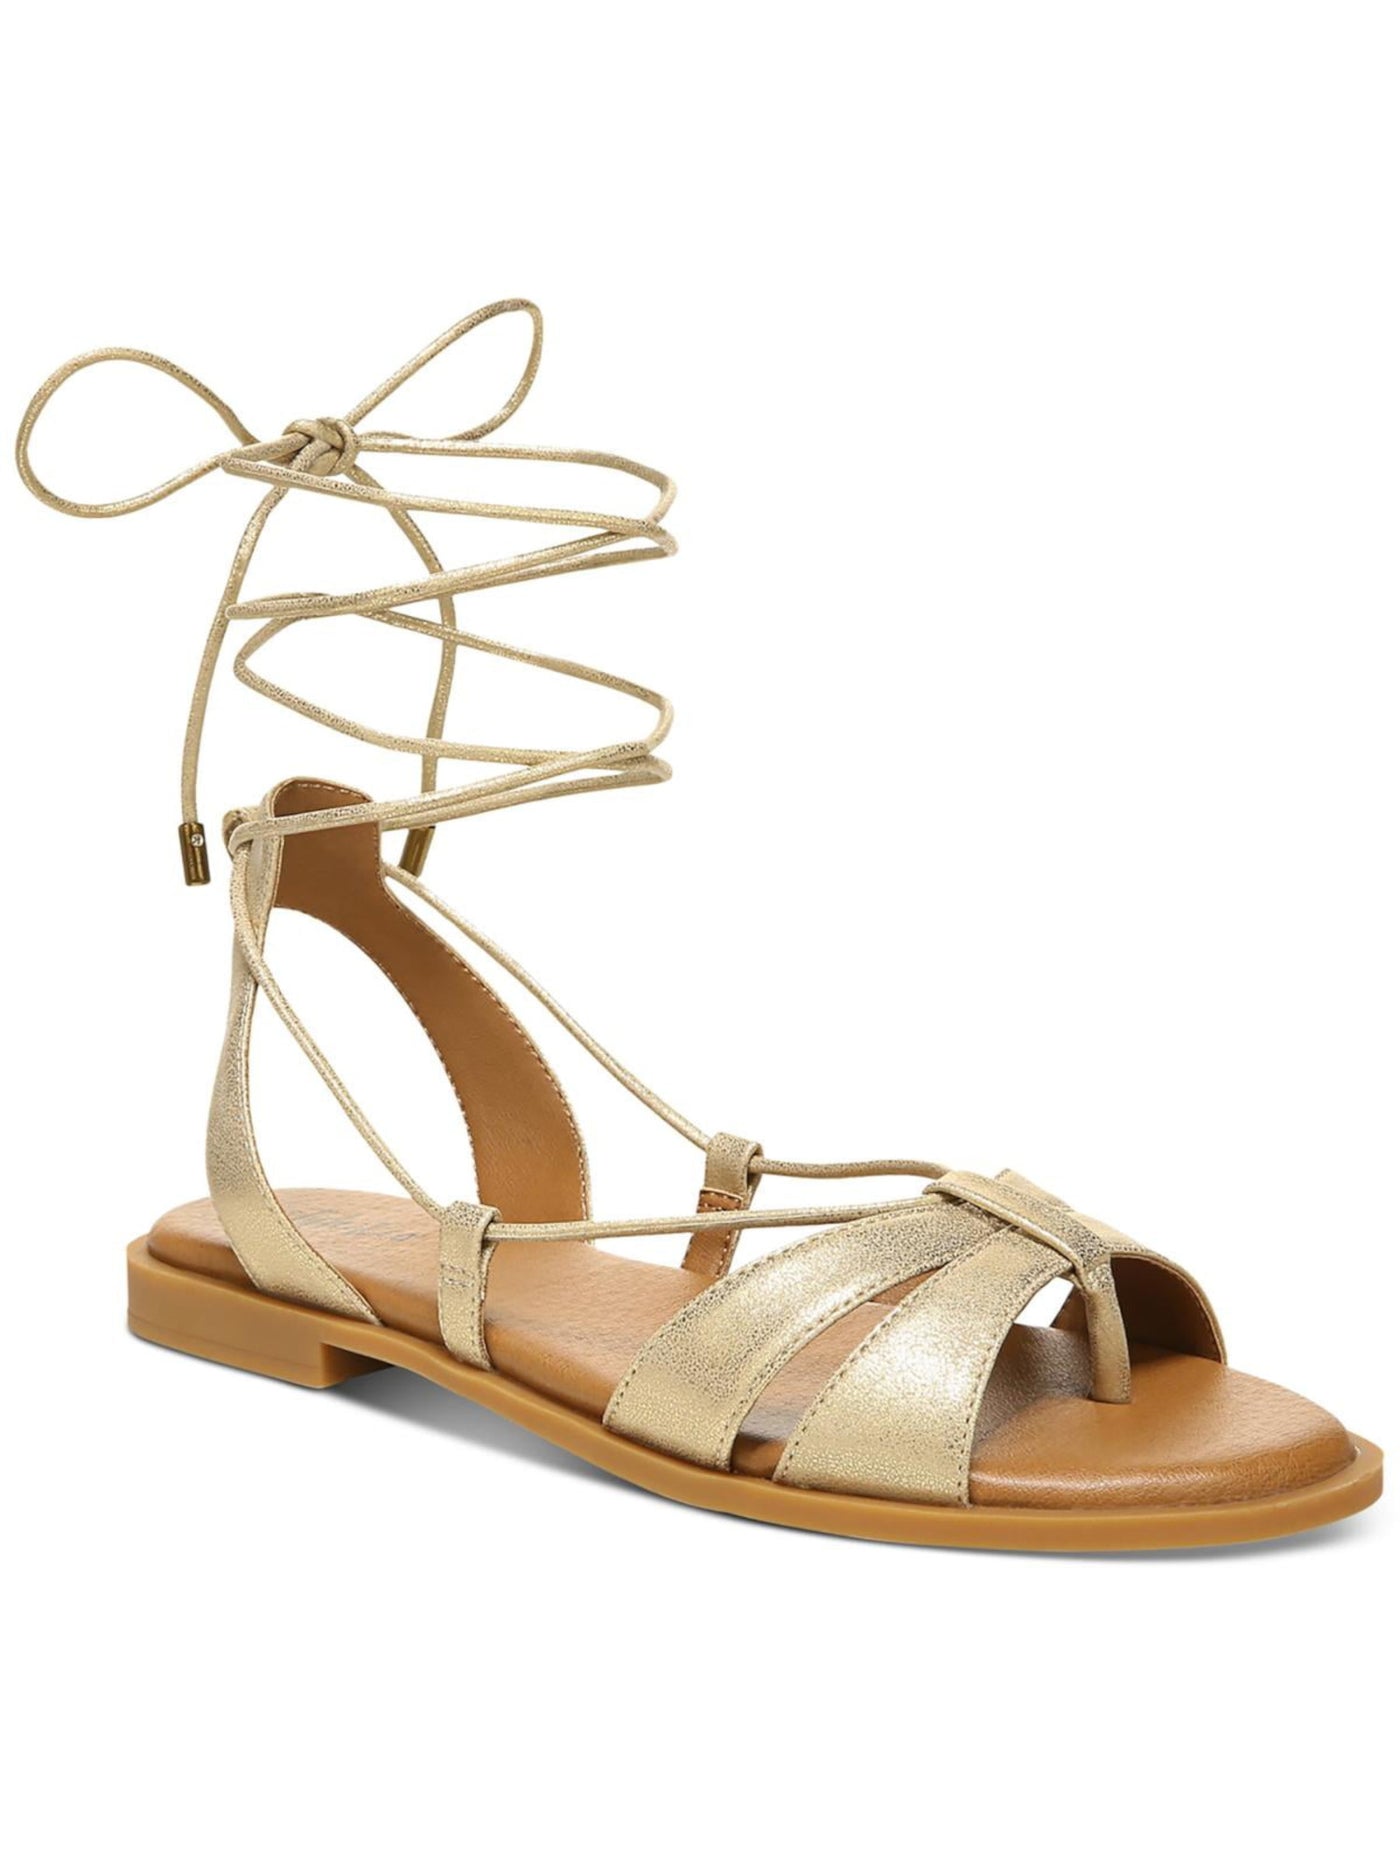 STYLE & COMPANY Womens Gold Strappy Padded Cairro Round Toe Lace-Up Sandals Shoes 6 M